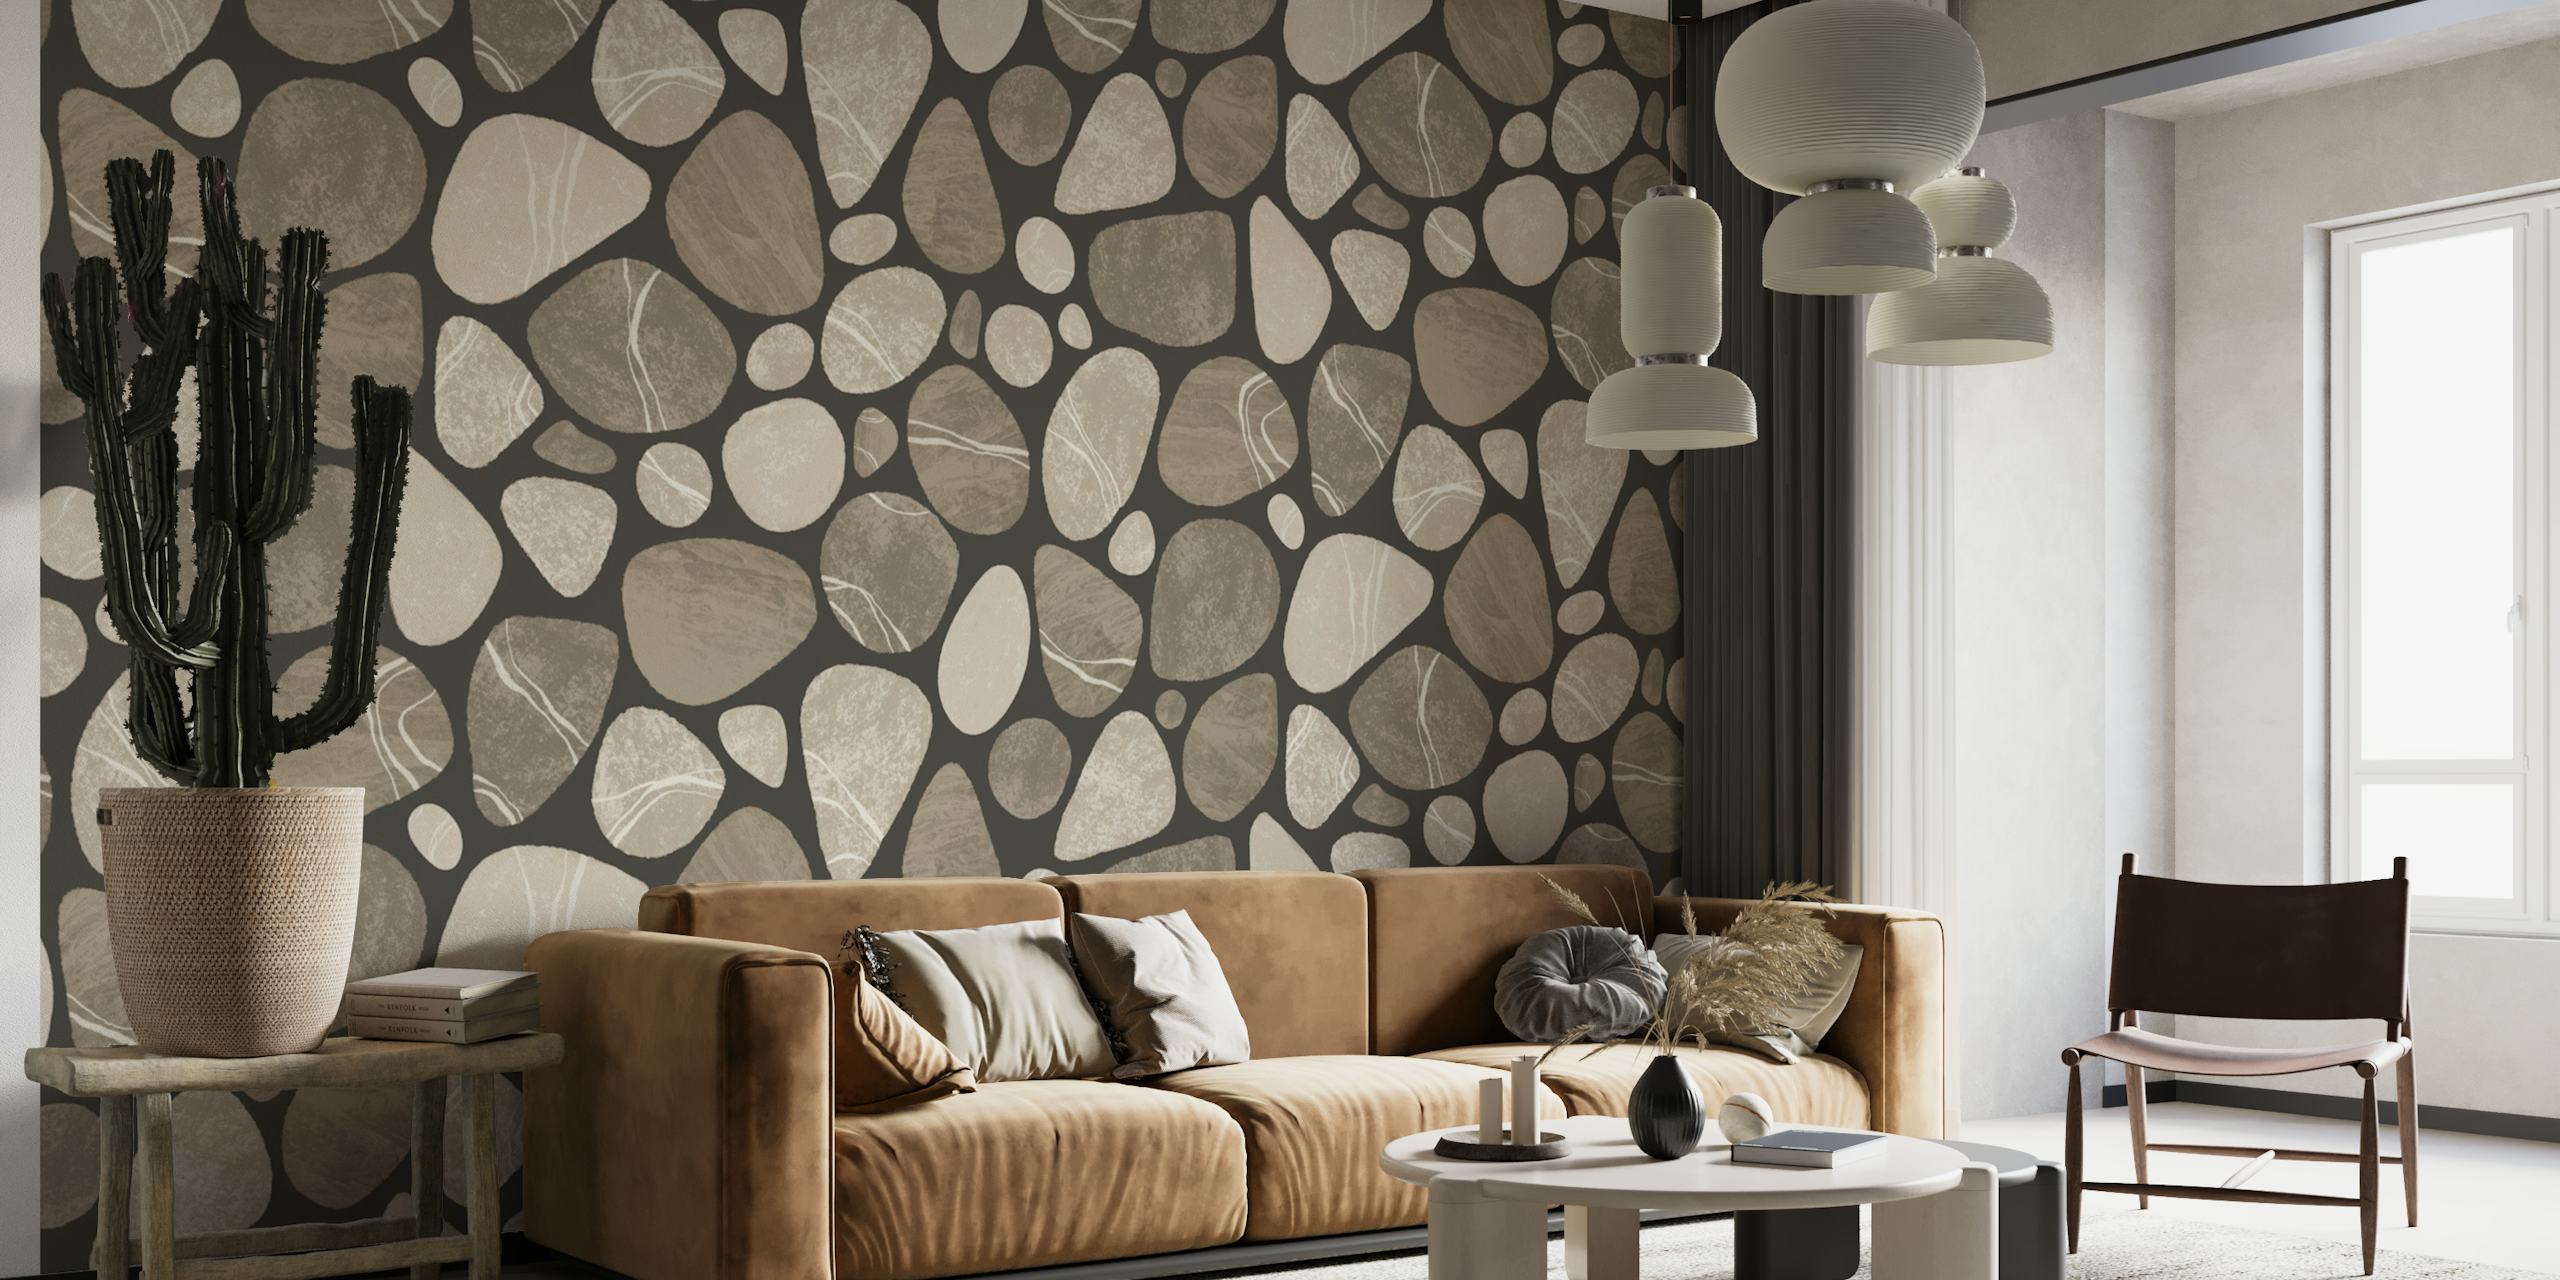 Pebble Serenity Stone Pattern Beauty Of Nature In Neutral Brown Beige Colors papiers peint